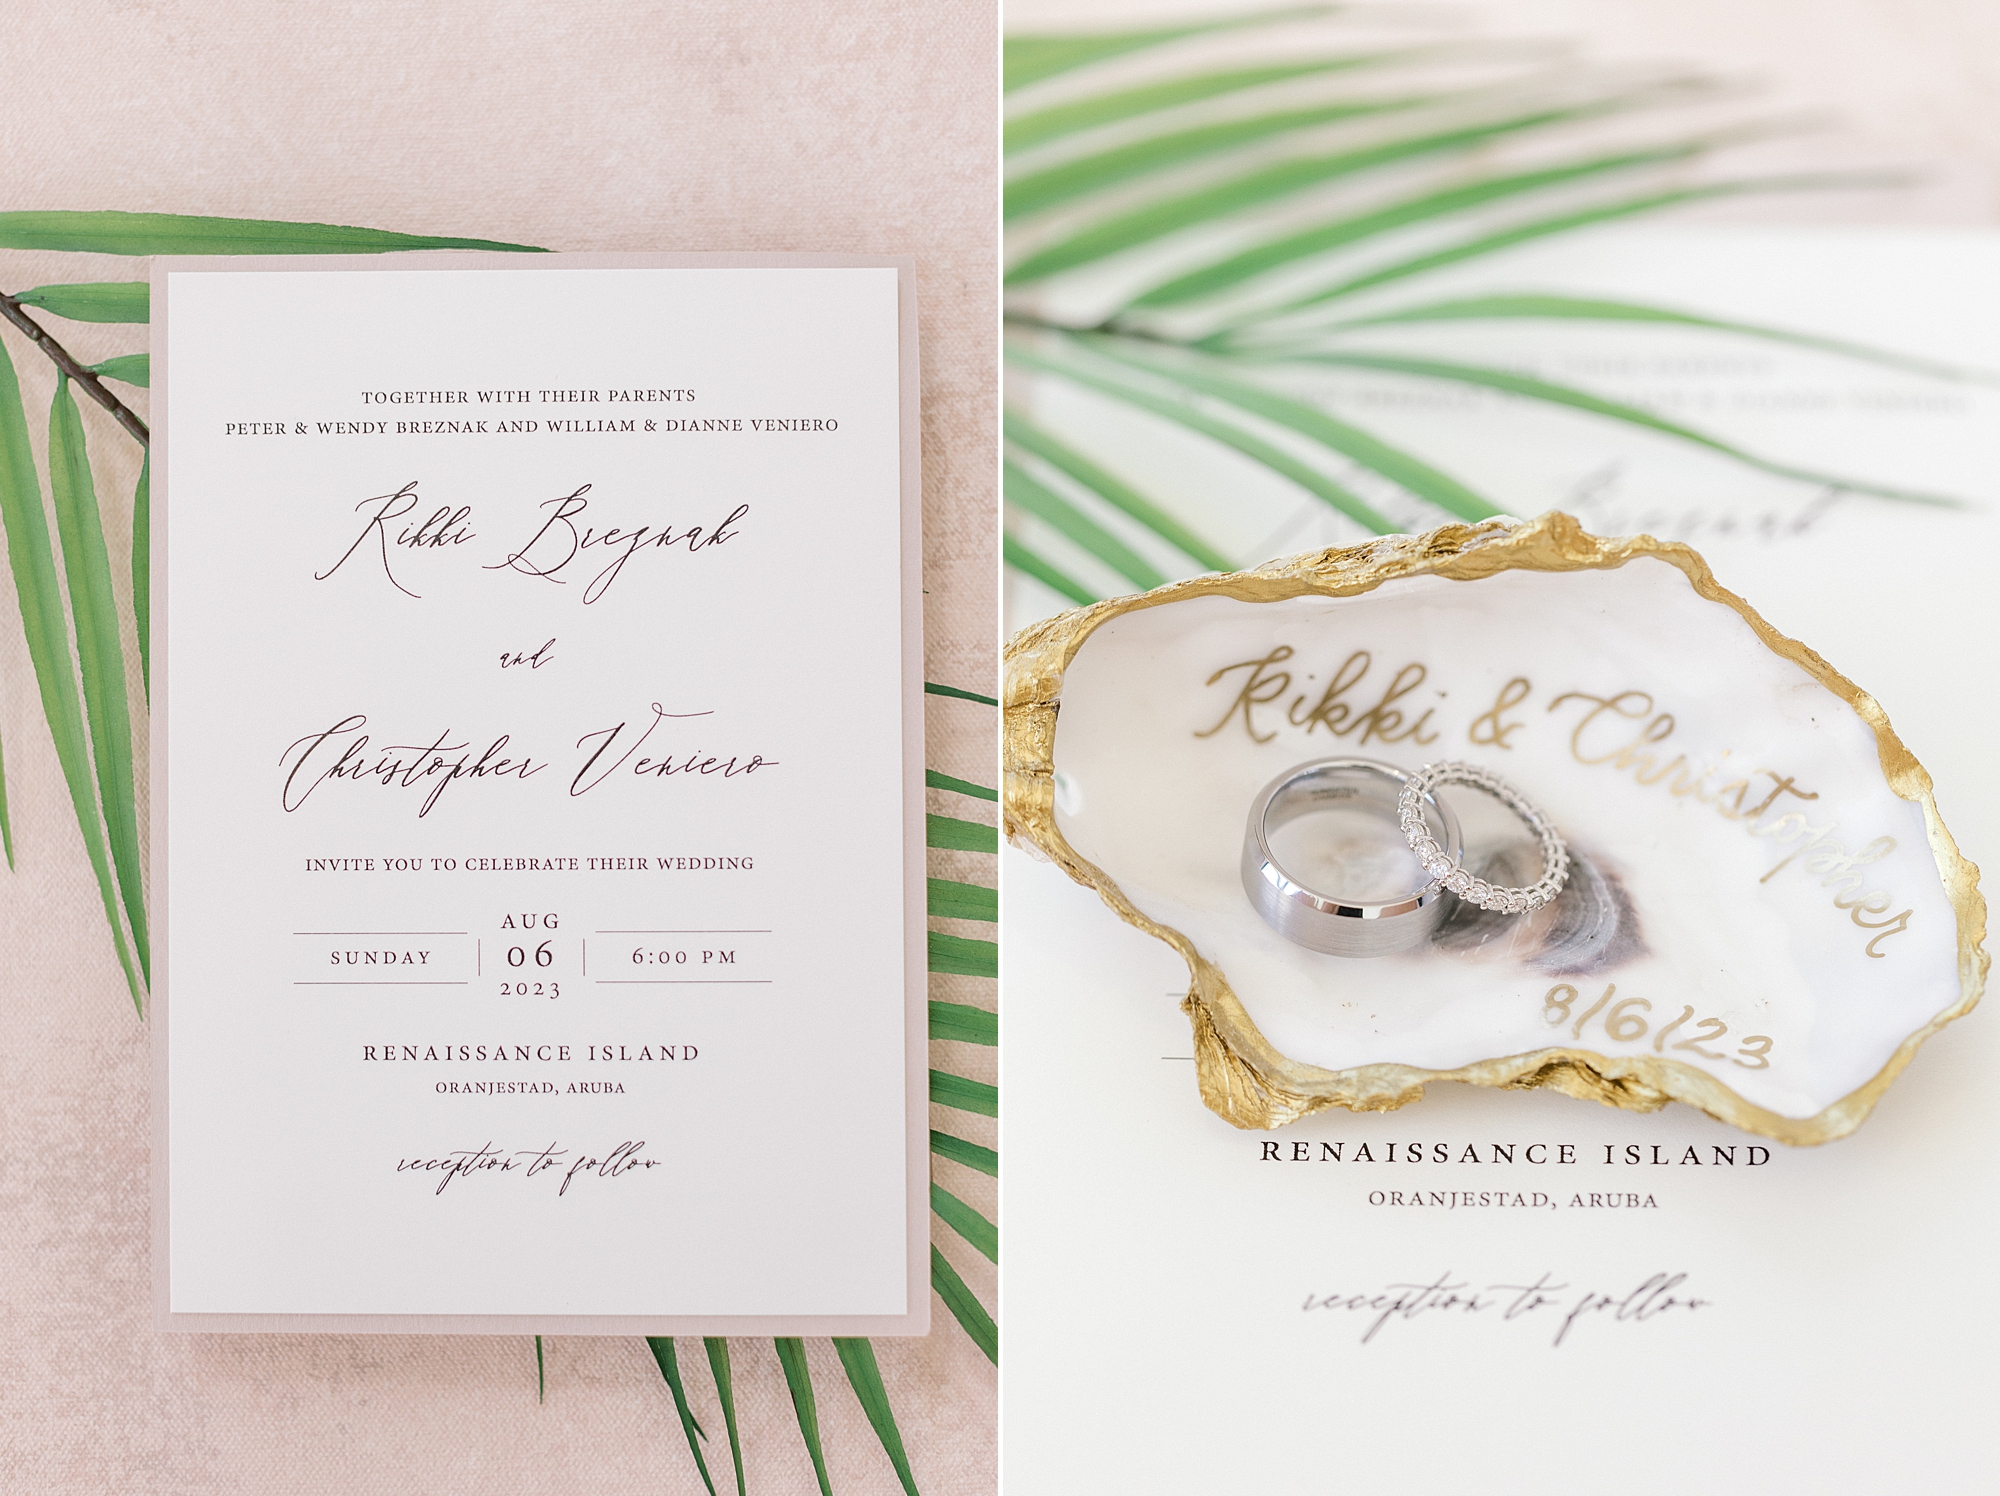 wedding rings rest in oyster shell on palm tree leaves